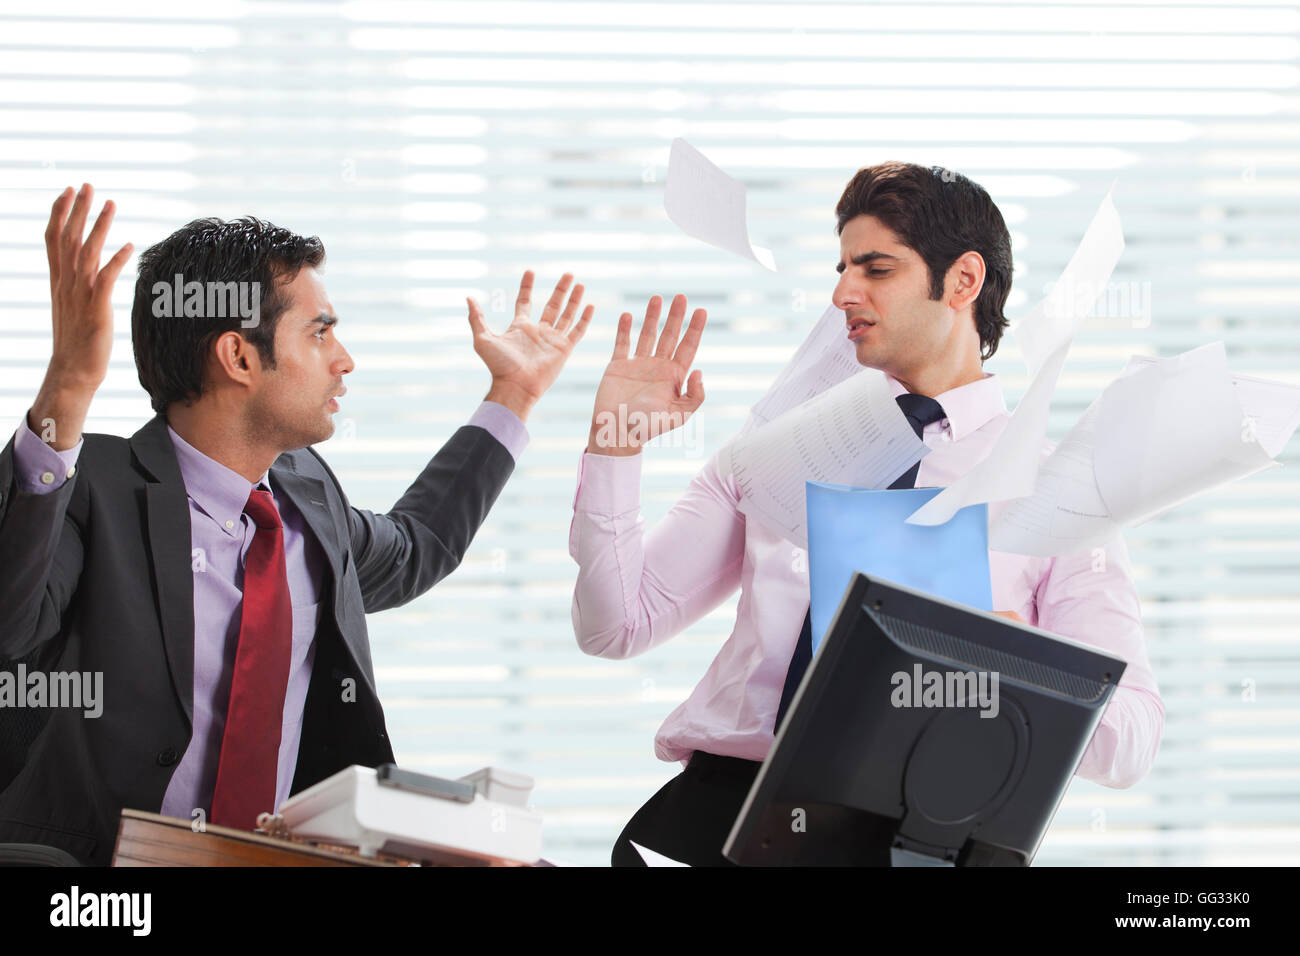 Displeased businessman throwing papers on executive Stock Photo